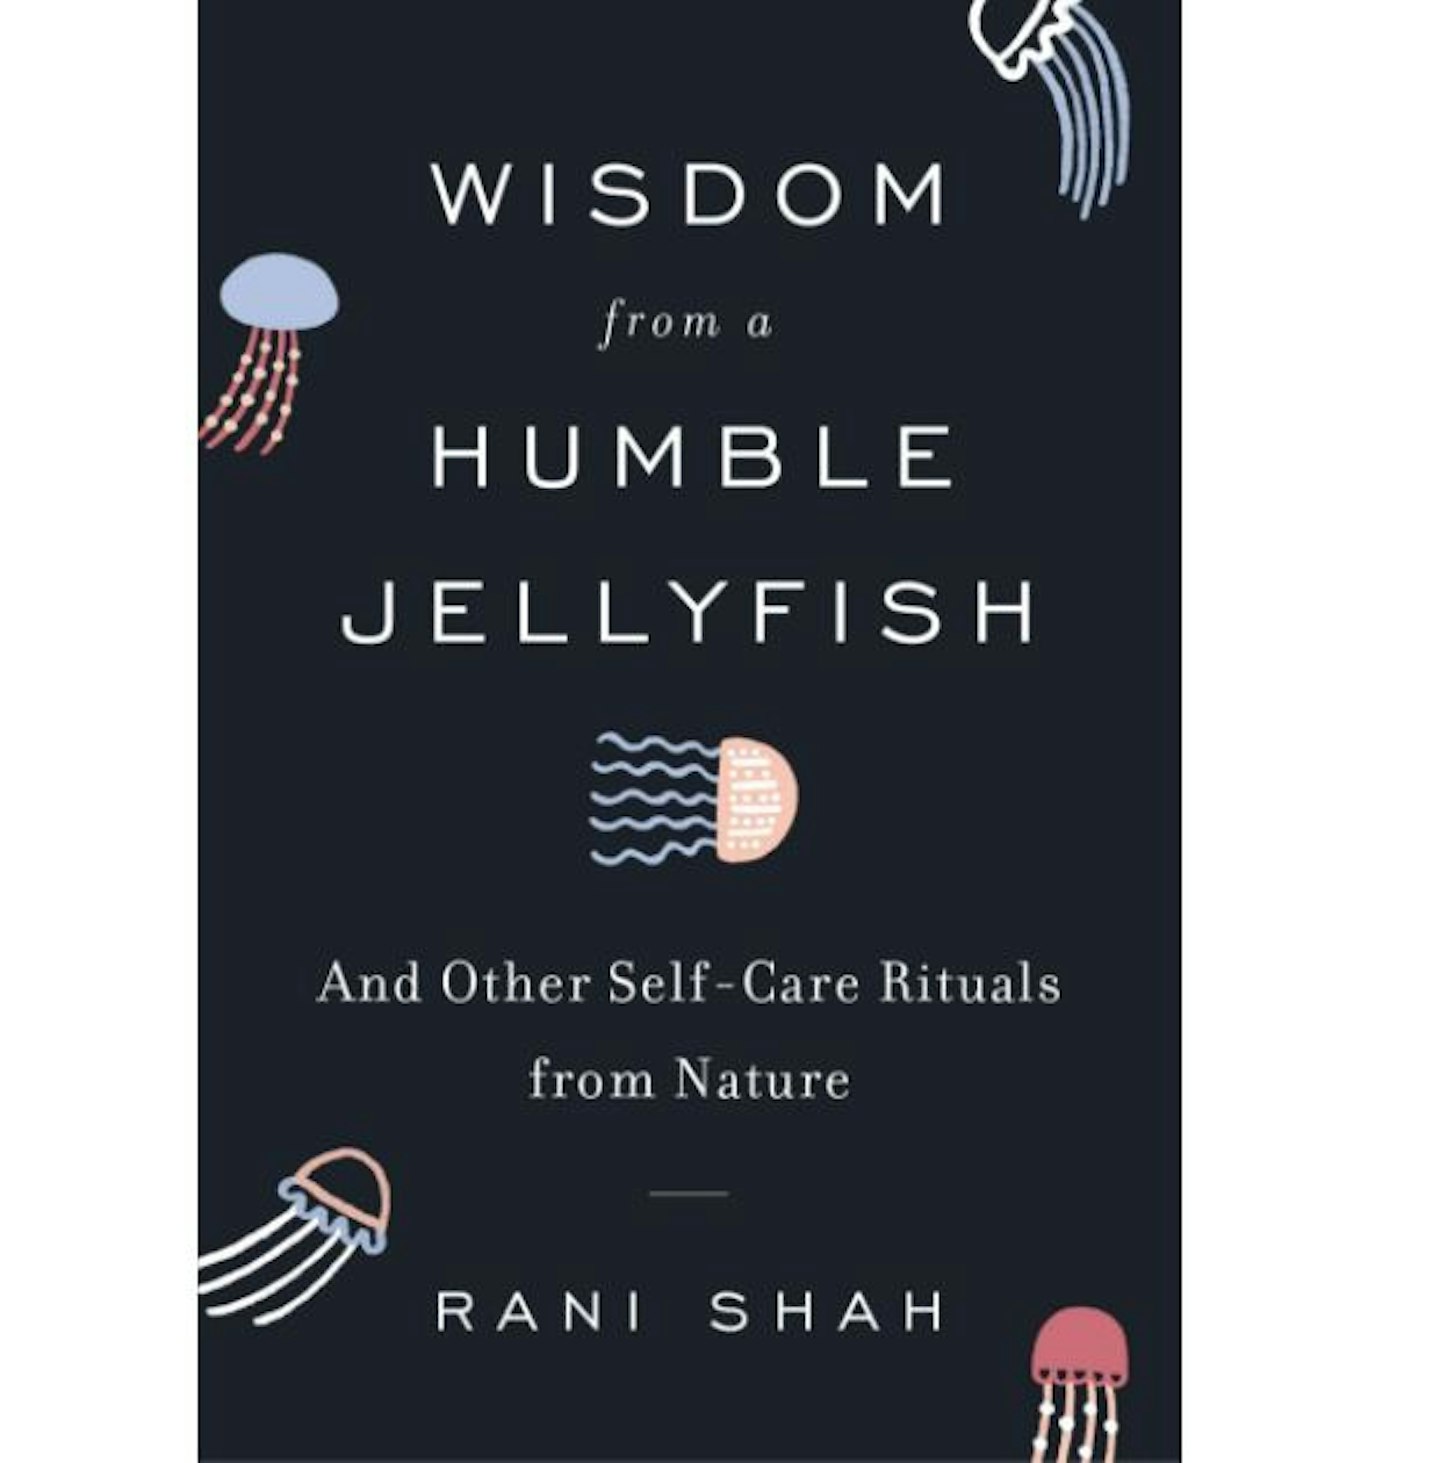 Wisdom from a Humble Jellyfish: And Other Self-Care Rituals by Rani Shah